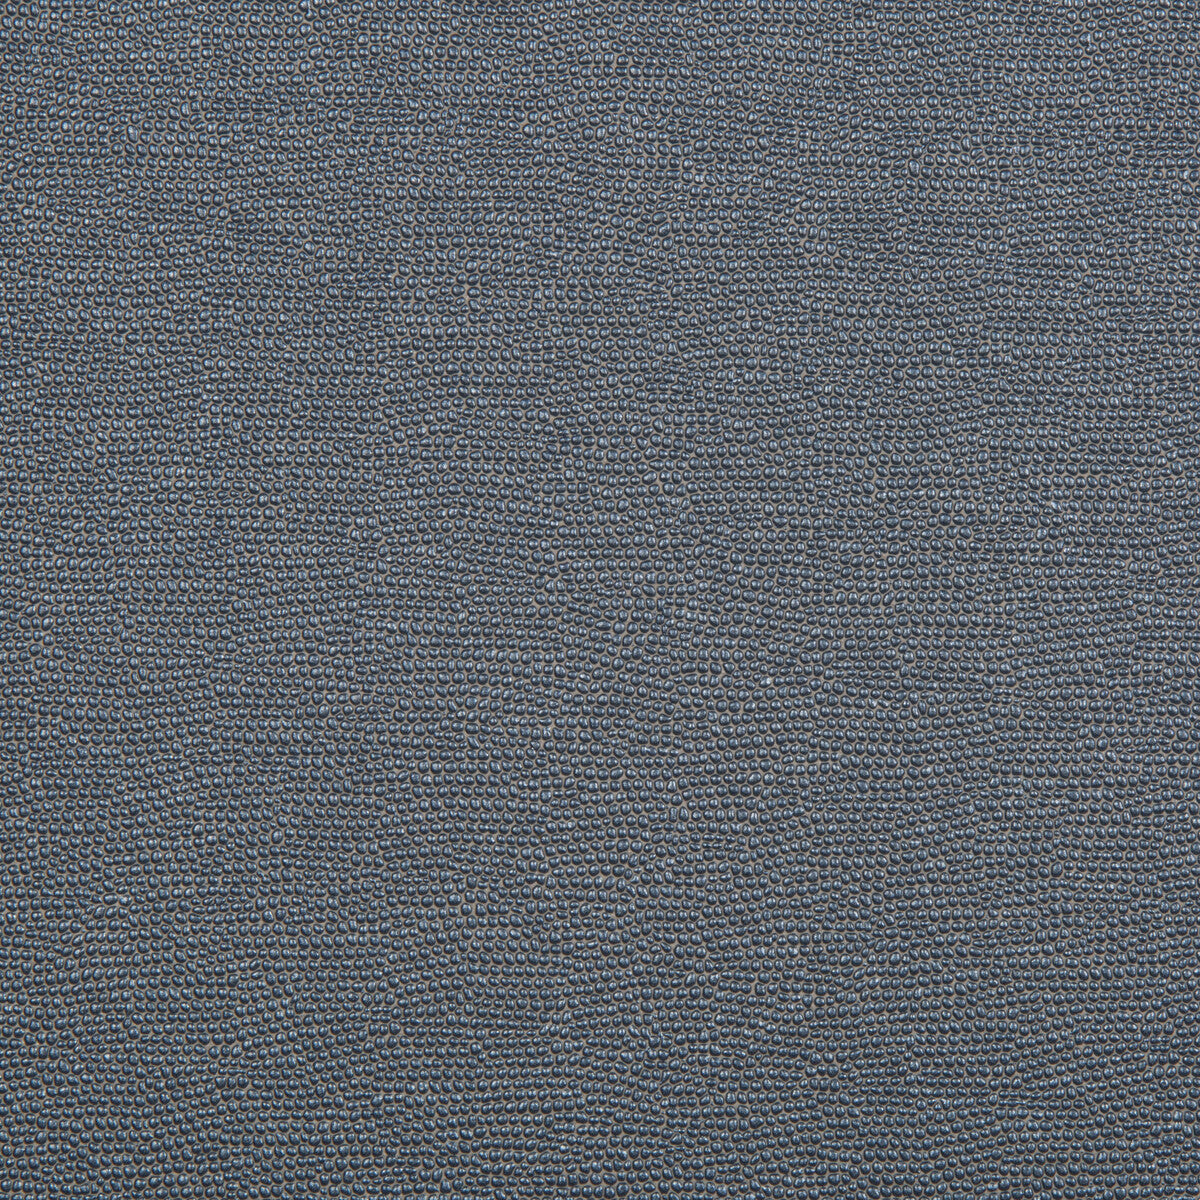 Spartan fabric in marlin color - pattern SPARTAN.52.0 - by Kravet Contract in the Faux Leather Extreme Performance collection